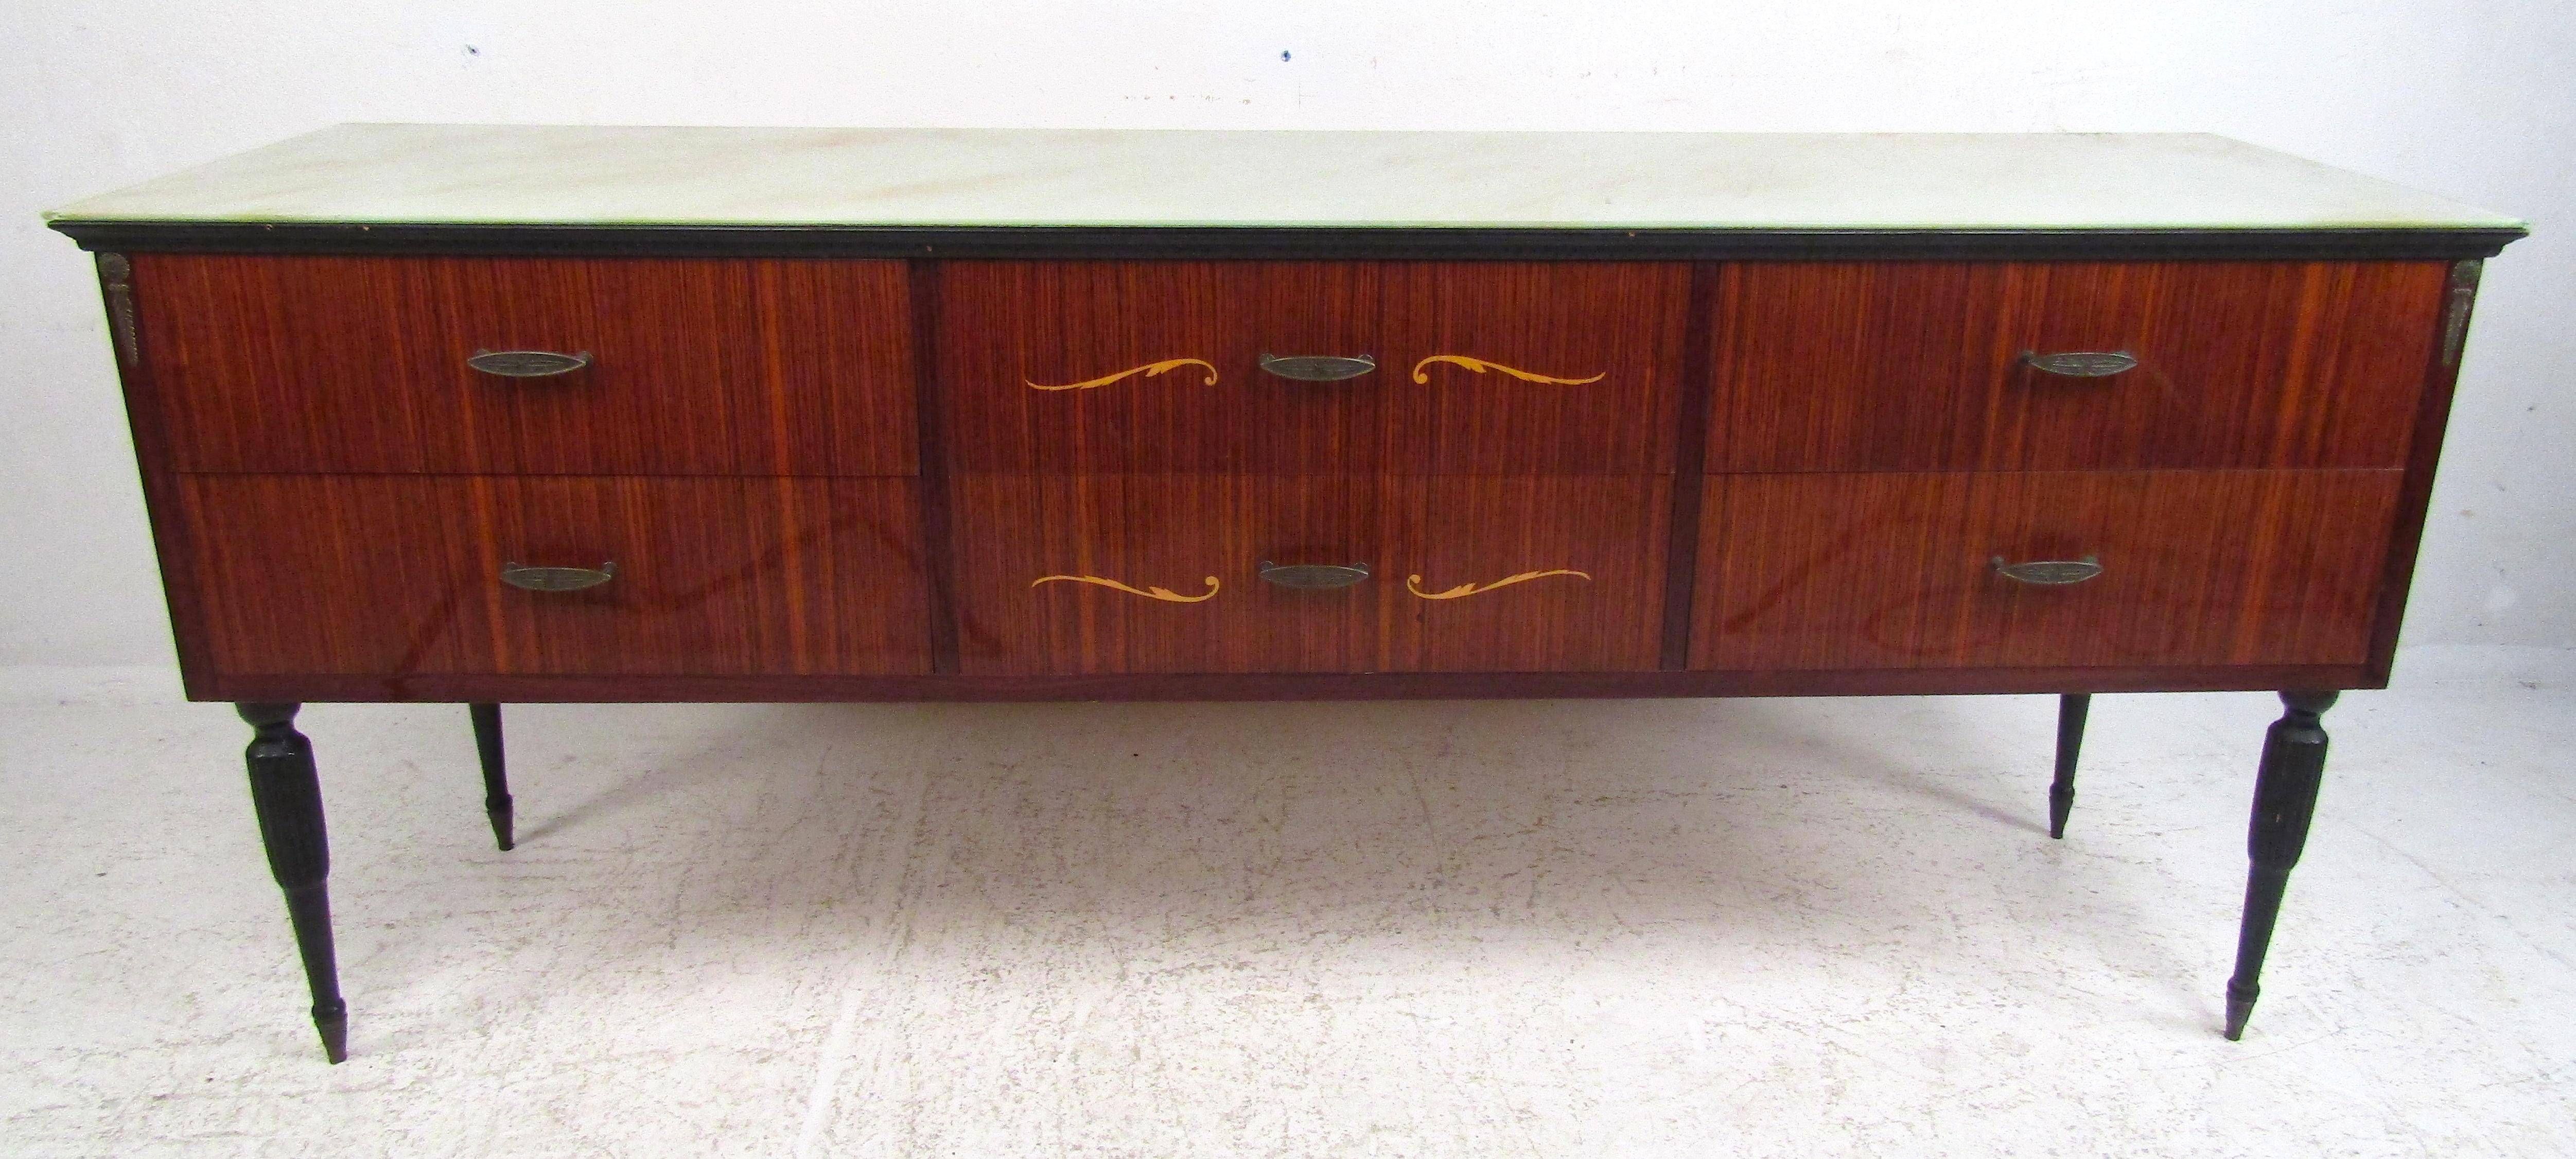 A fabulous midcentury Italian dresser that boasts an elaborate glass top, carved legs, and unique inlays on the drawer fronts. This well-made case piece shows attention to details with its brass oval drawer pulls and unusual decorative fixtures on